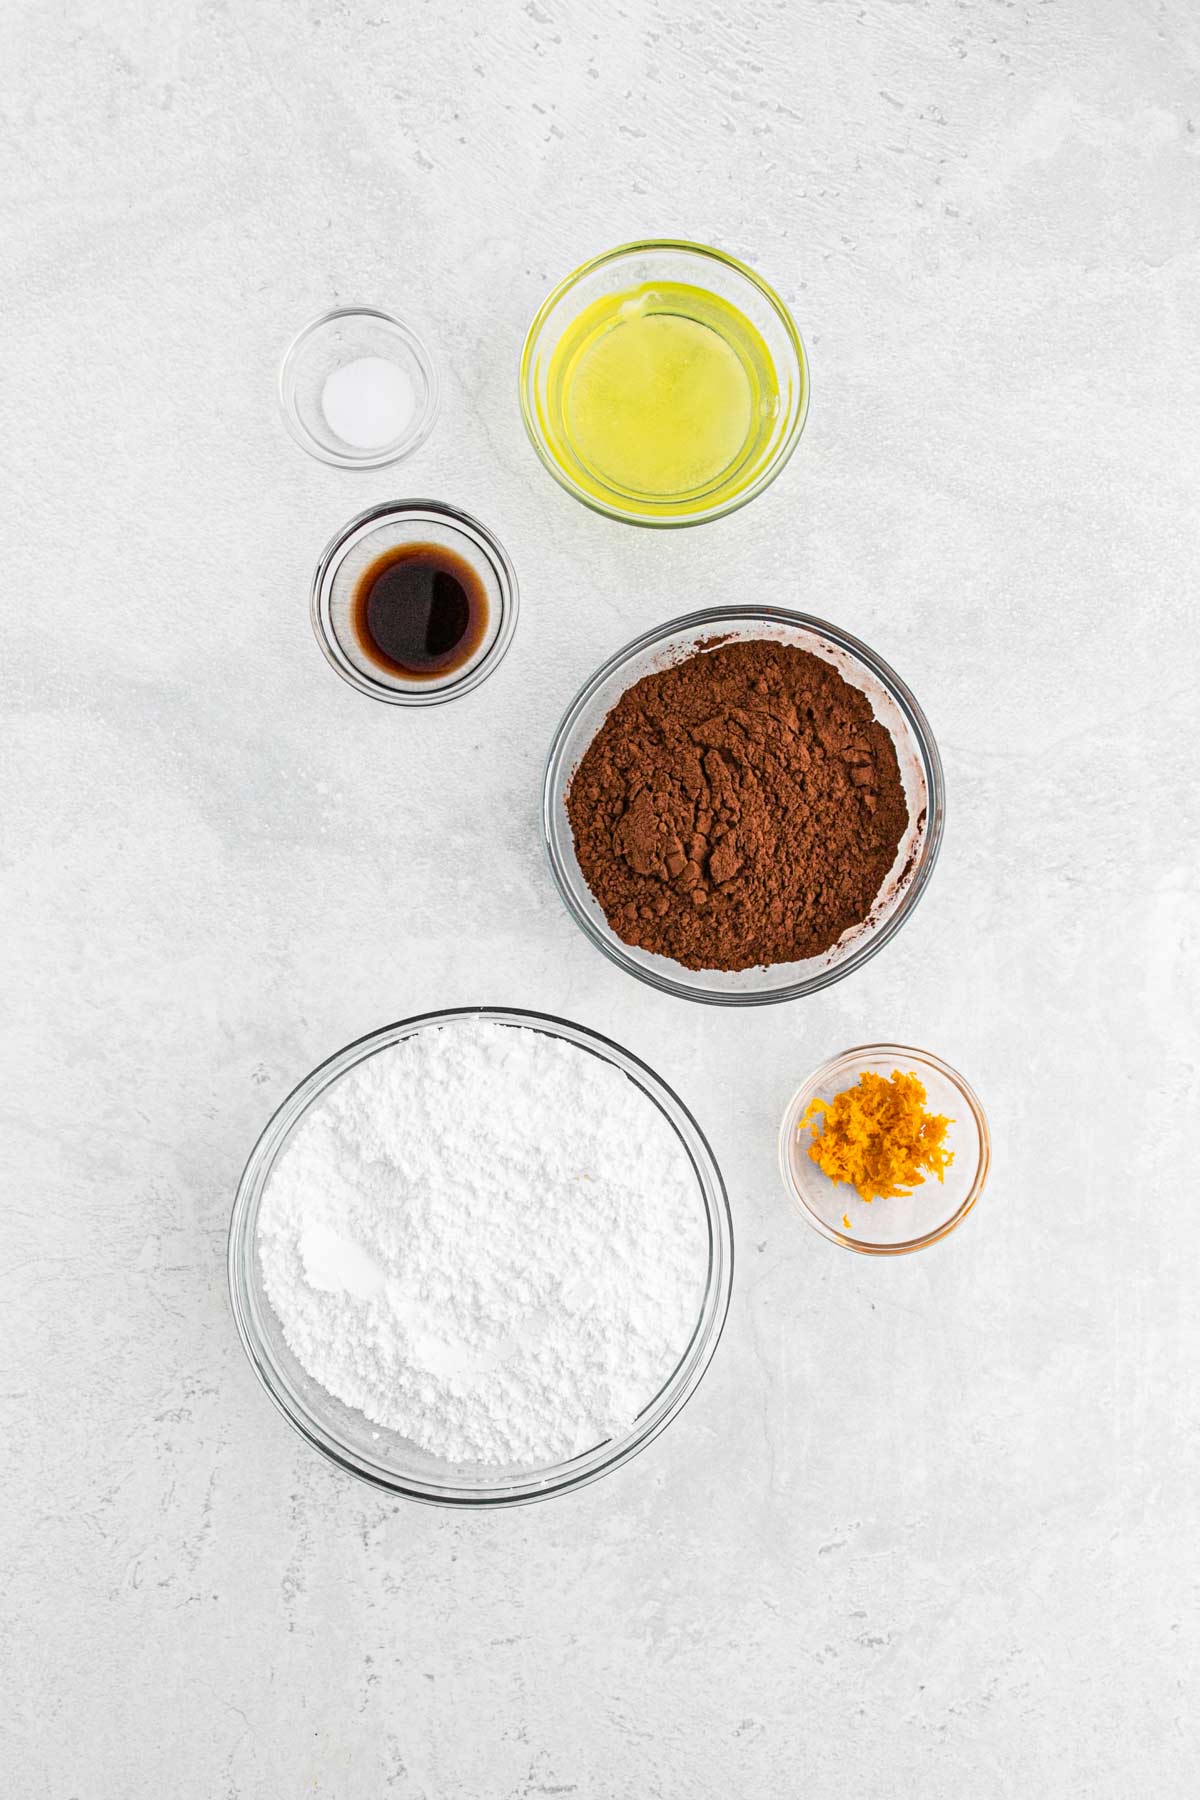 Ingredients to make chocolate orange cookies on the table.